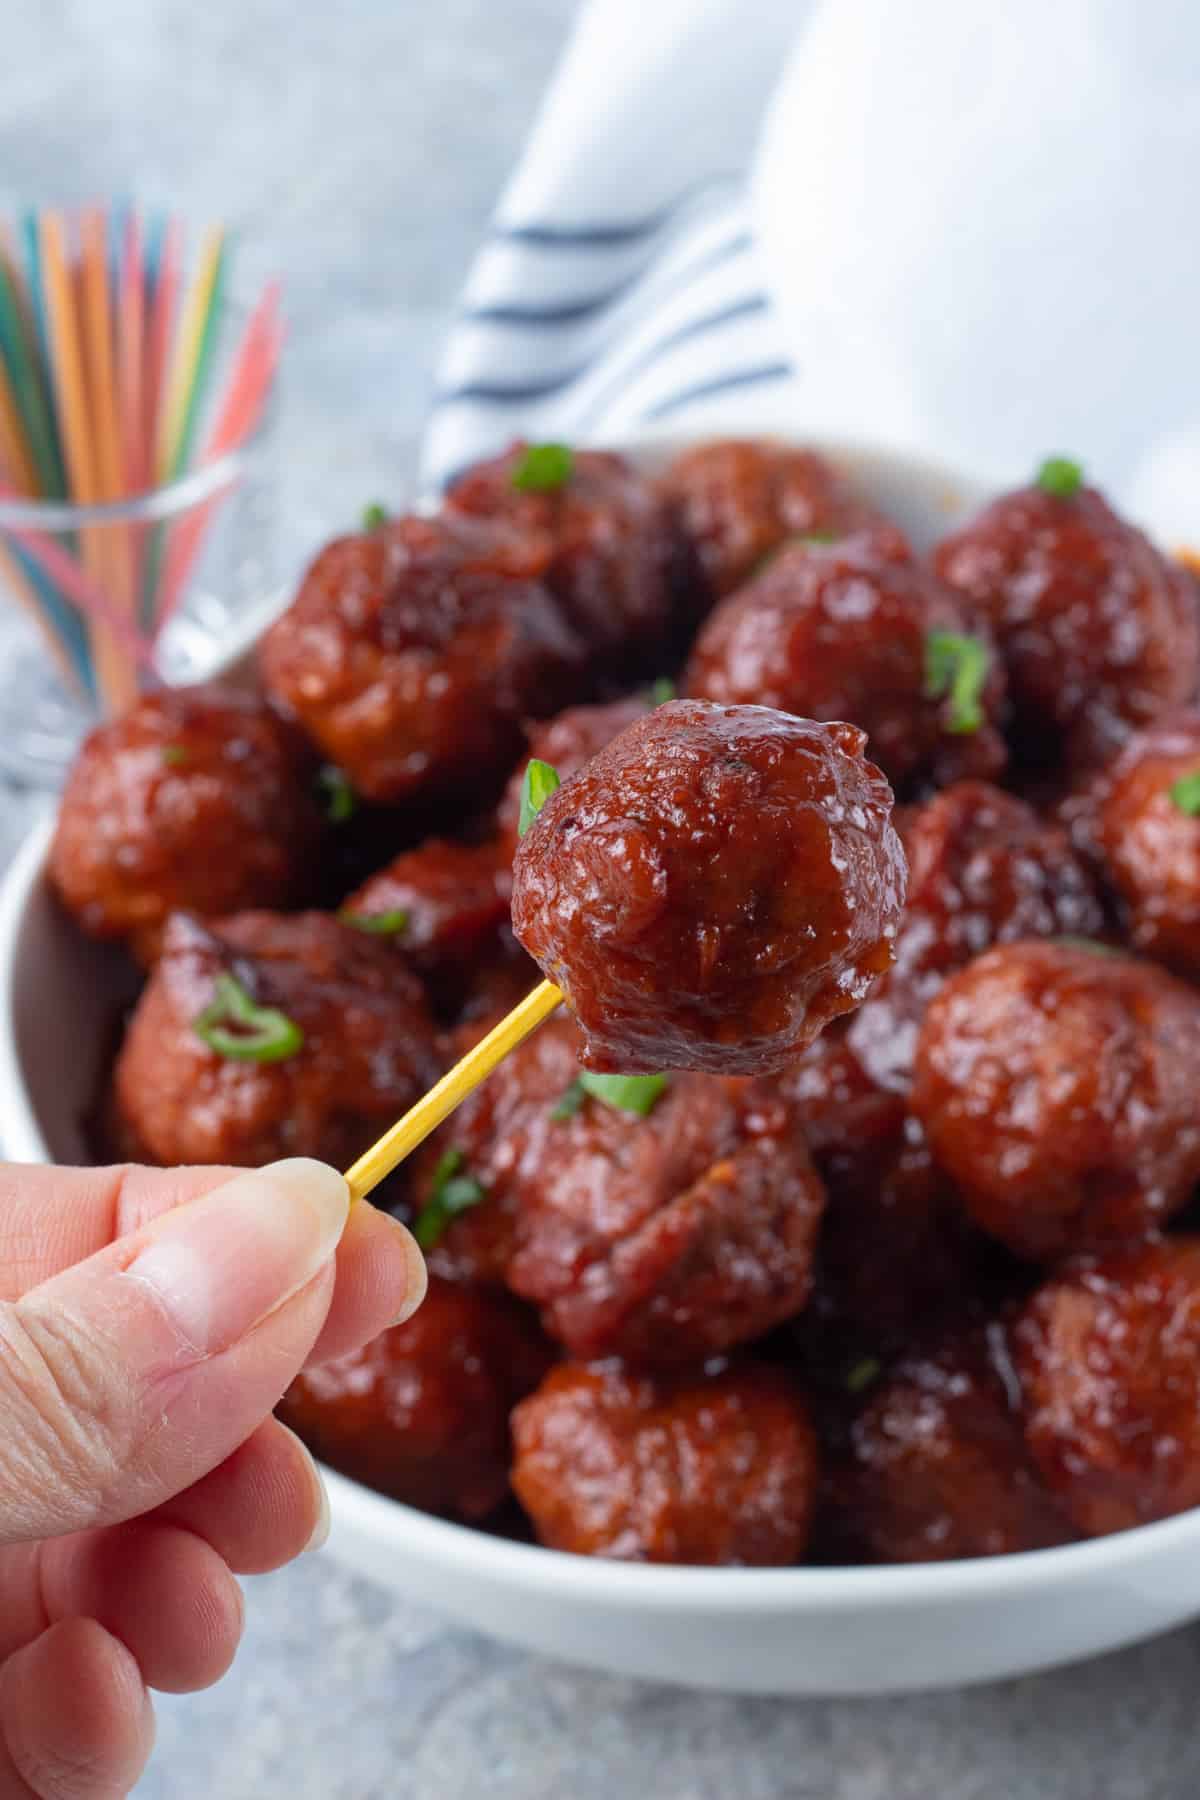 Meatballs with cranberry sauce, and chili sauce/